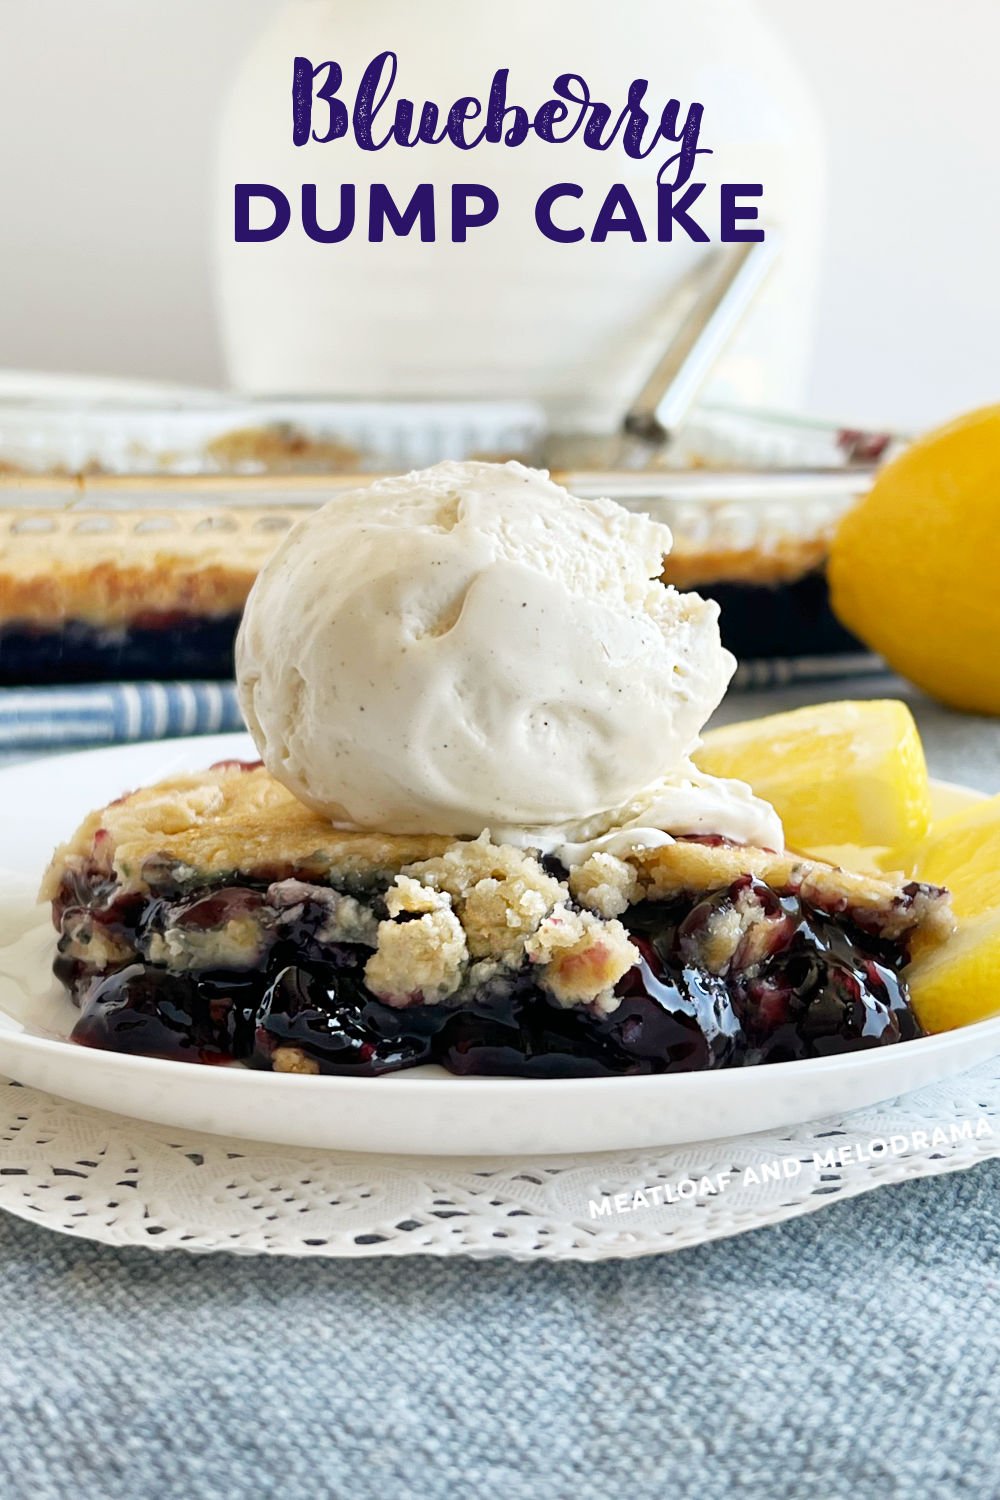 This Blueberry Dump Cake recipe uses blueberry pie filling, cake mix and butter to make one of the best easy blueberry desserts ever! Your whole family will enjoy this delicious dessert, and it's perfect for potlucks and family gatherings! via @meamel